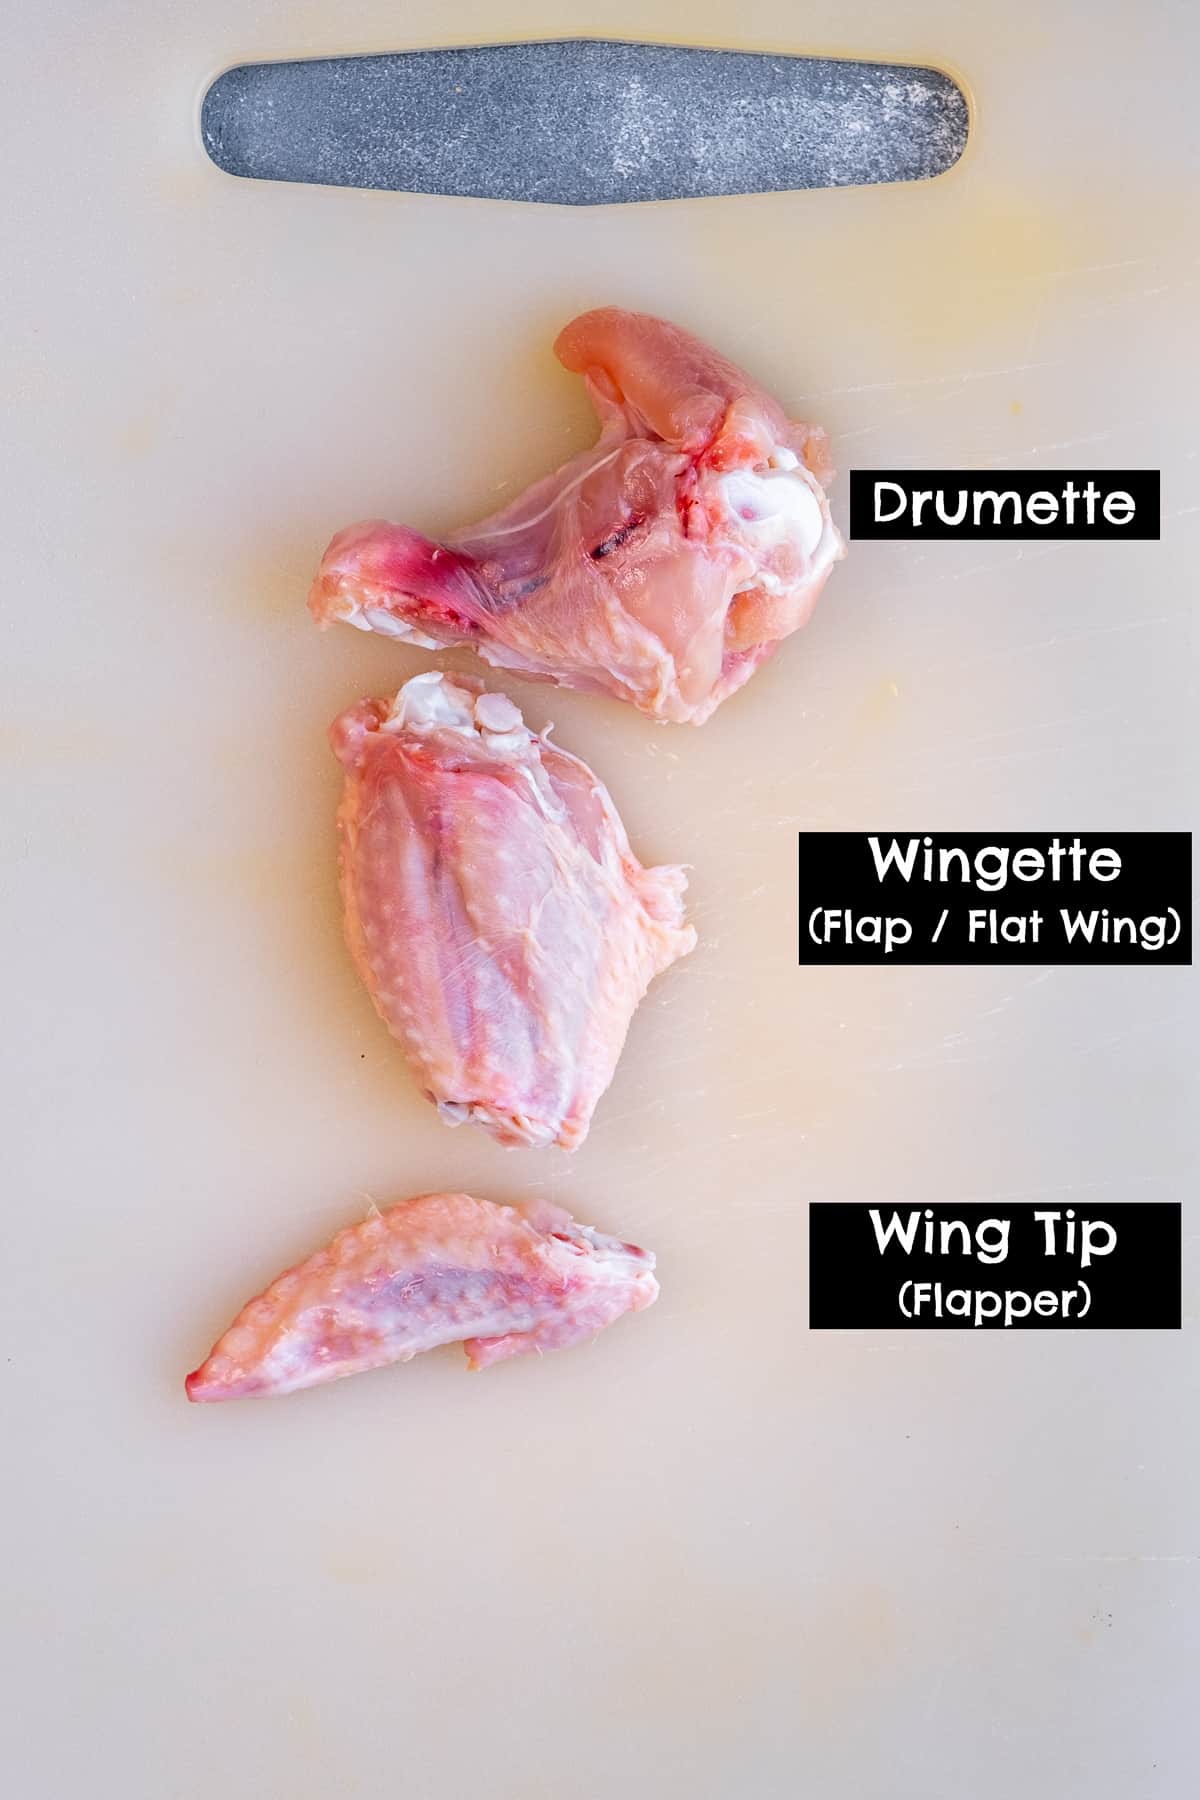 A drumette, a wignette and a wing tip on a white cutting board.